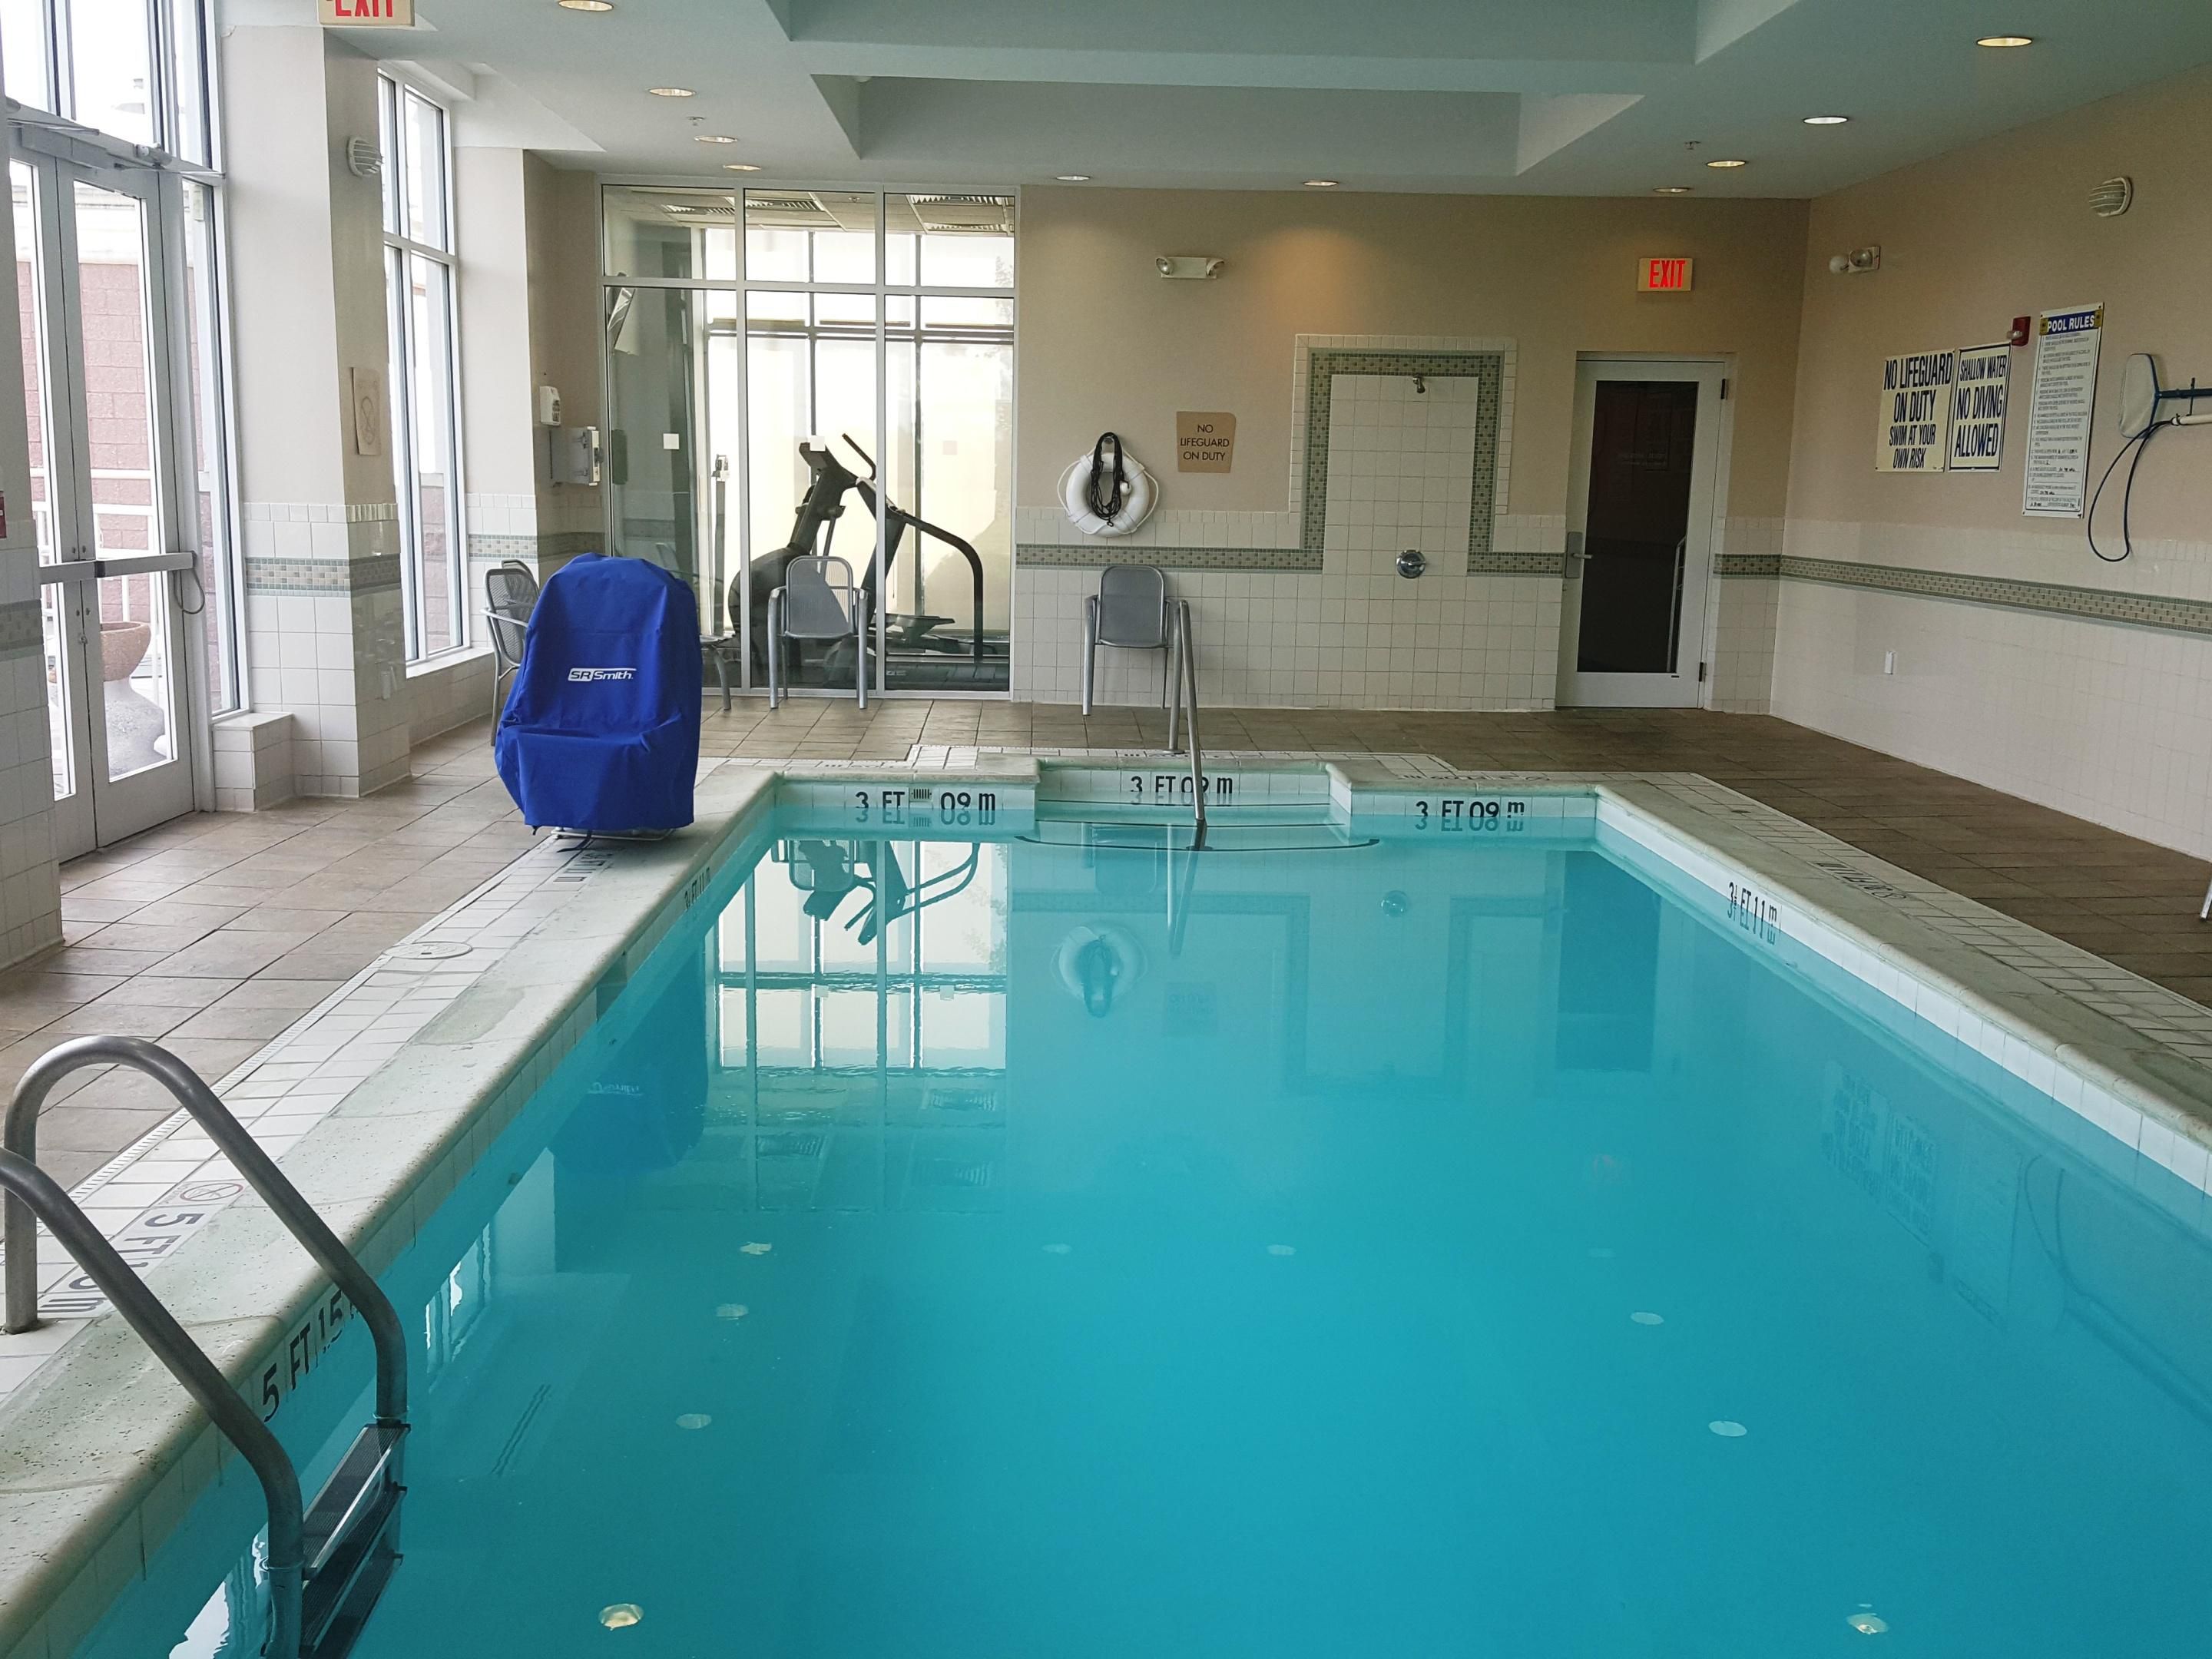 Looking to enjoy the pool and not have to worry about the weather or outside elements? Look no further! We are the only hotel in Santee, SC that has an indoor pool. Come on in and beat the outside elements with a worry free swim.